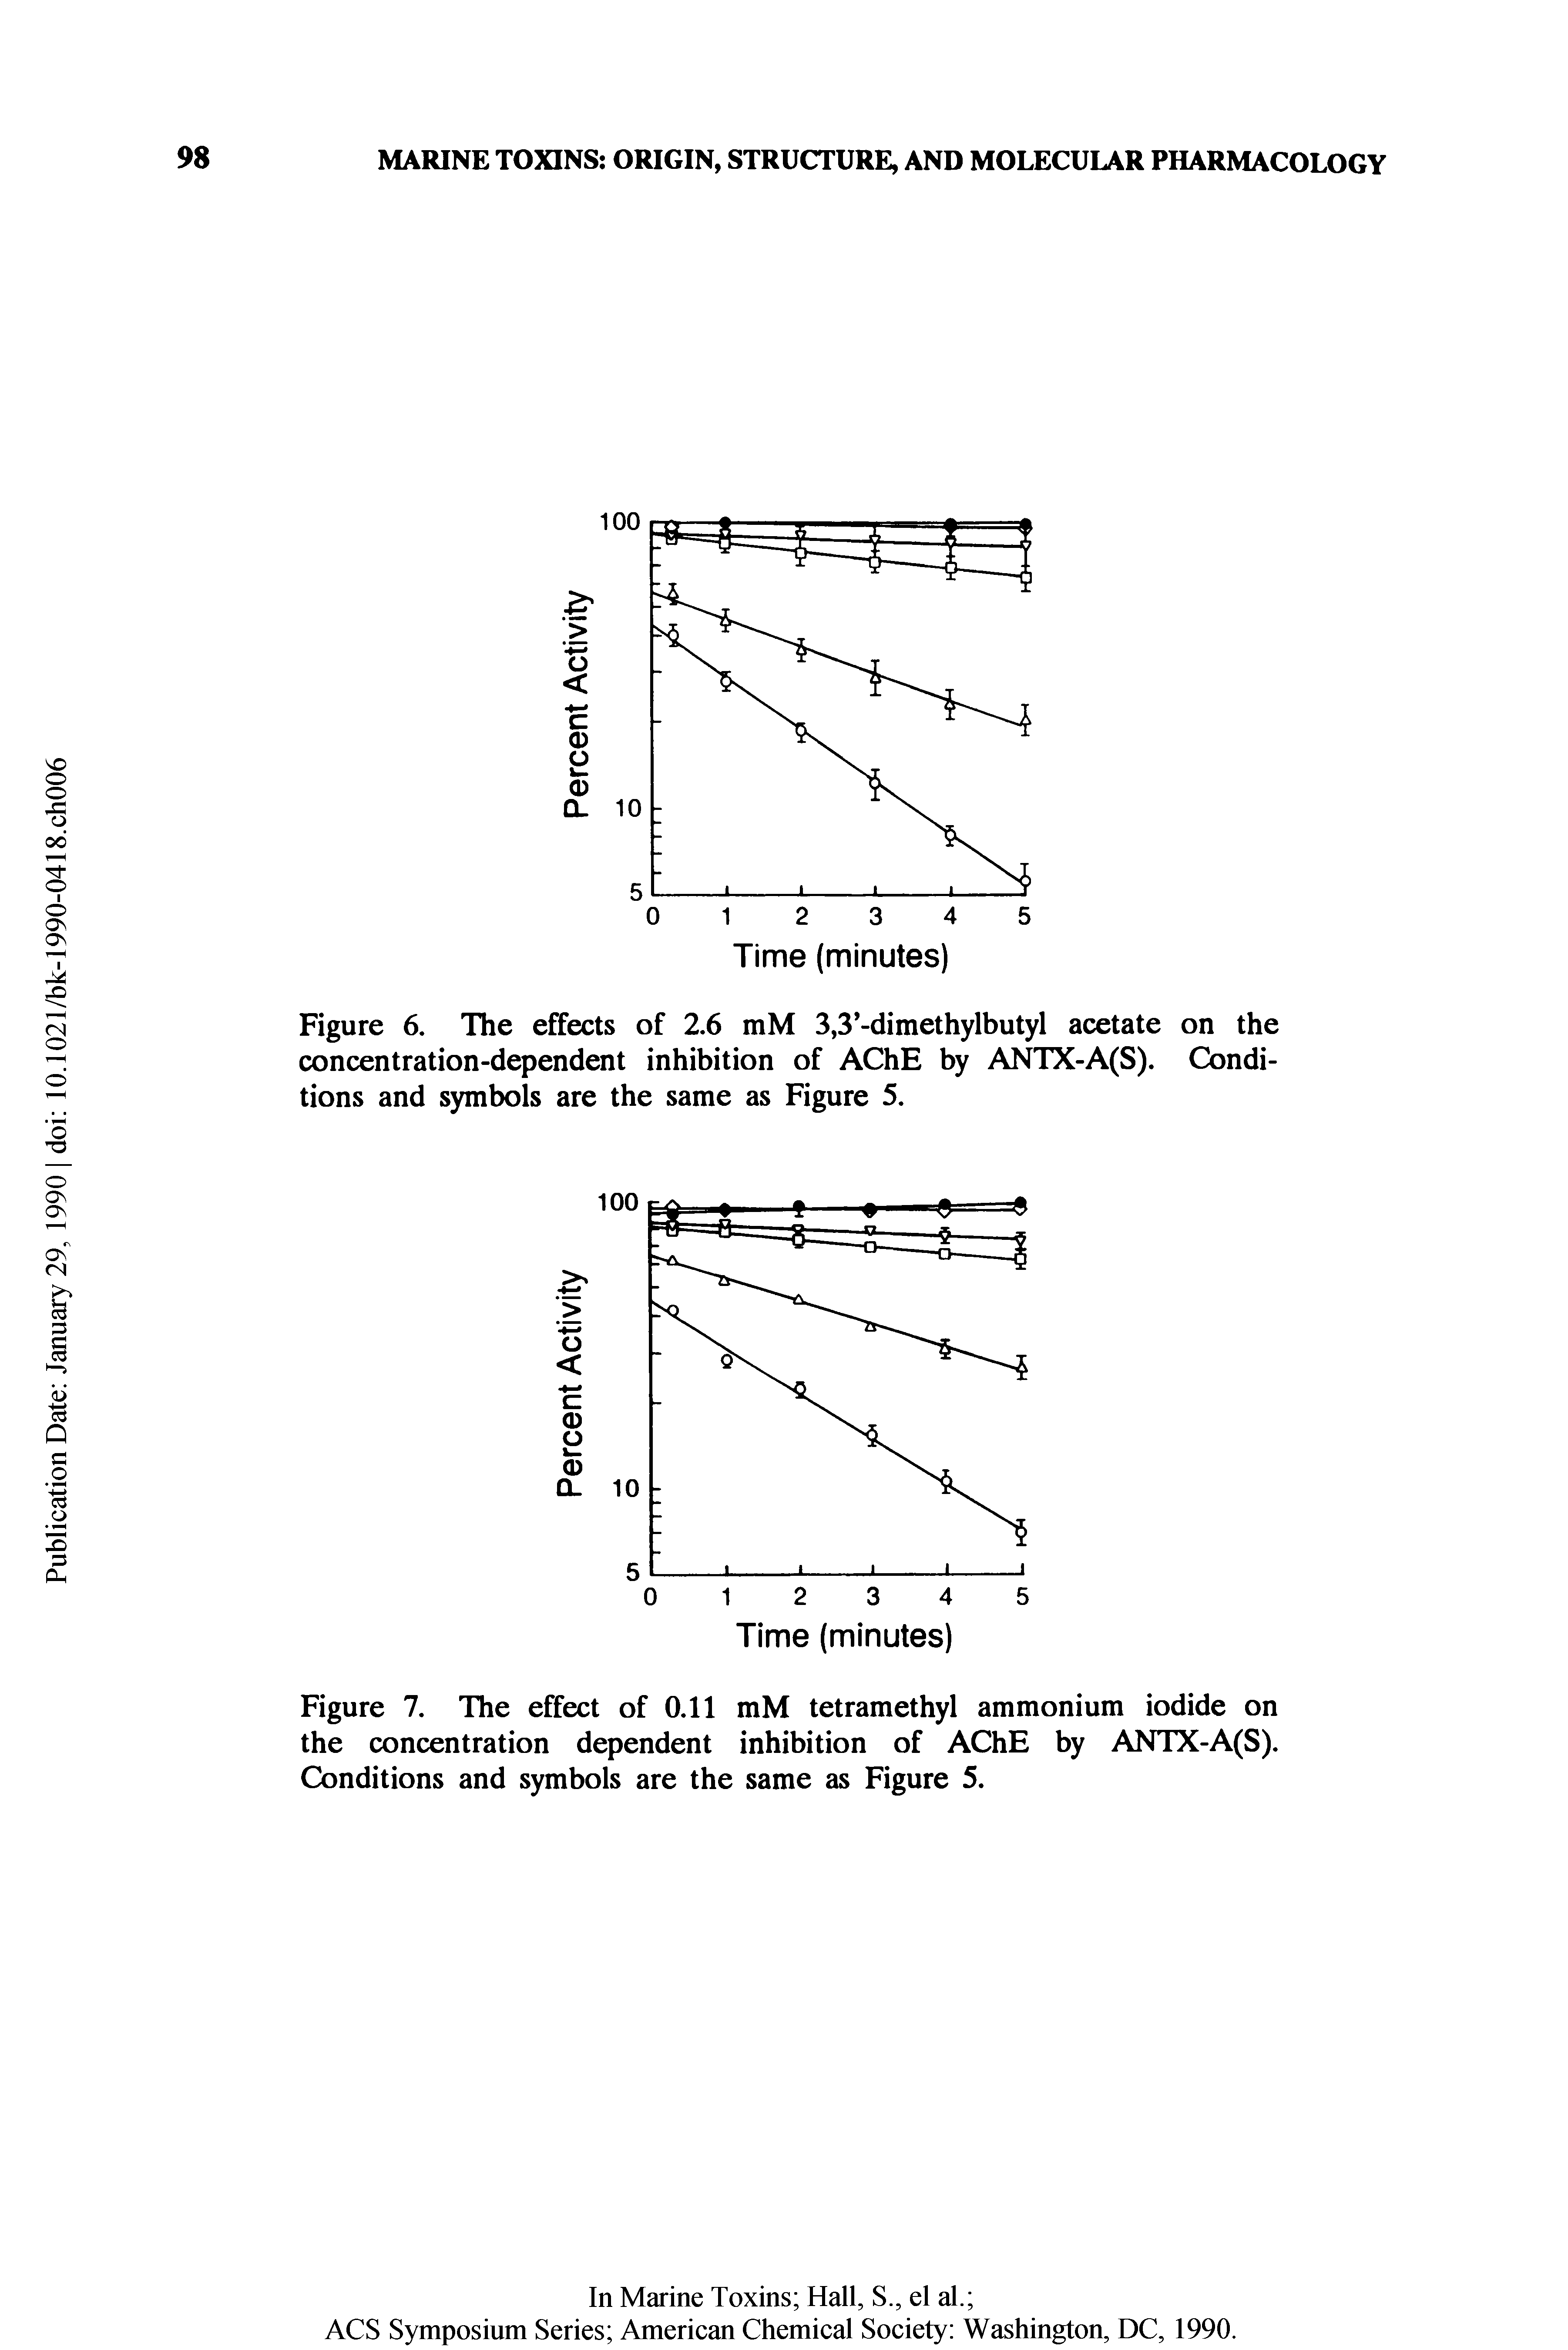 Figure 6. The effects of 2.6 mM 3,3 -dimethylbutyl acetate on the concentration-dependent inhibition of AChE by ANTX-A(S). Conditions and symbols are the same as Figure 5.